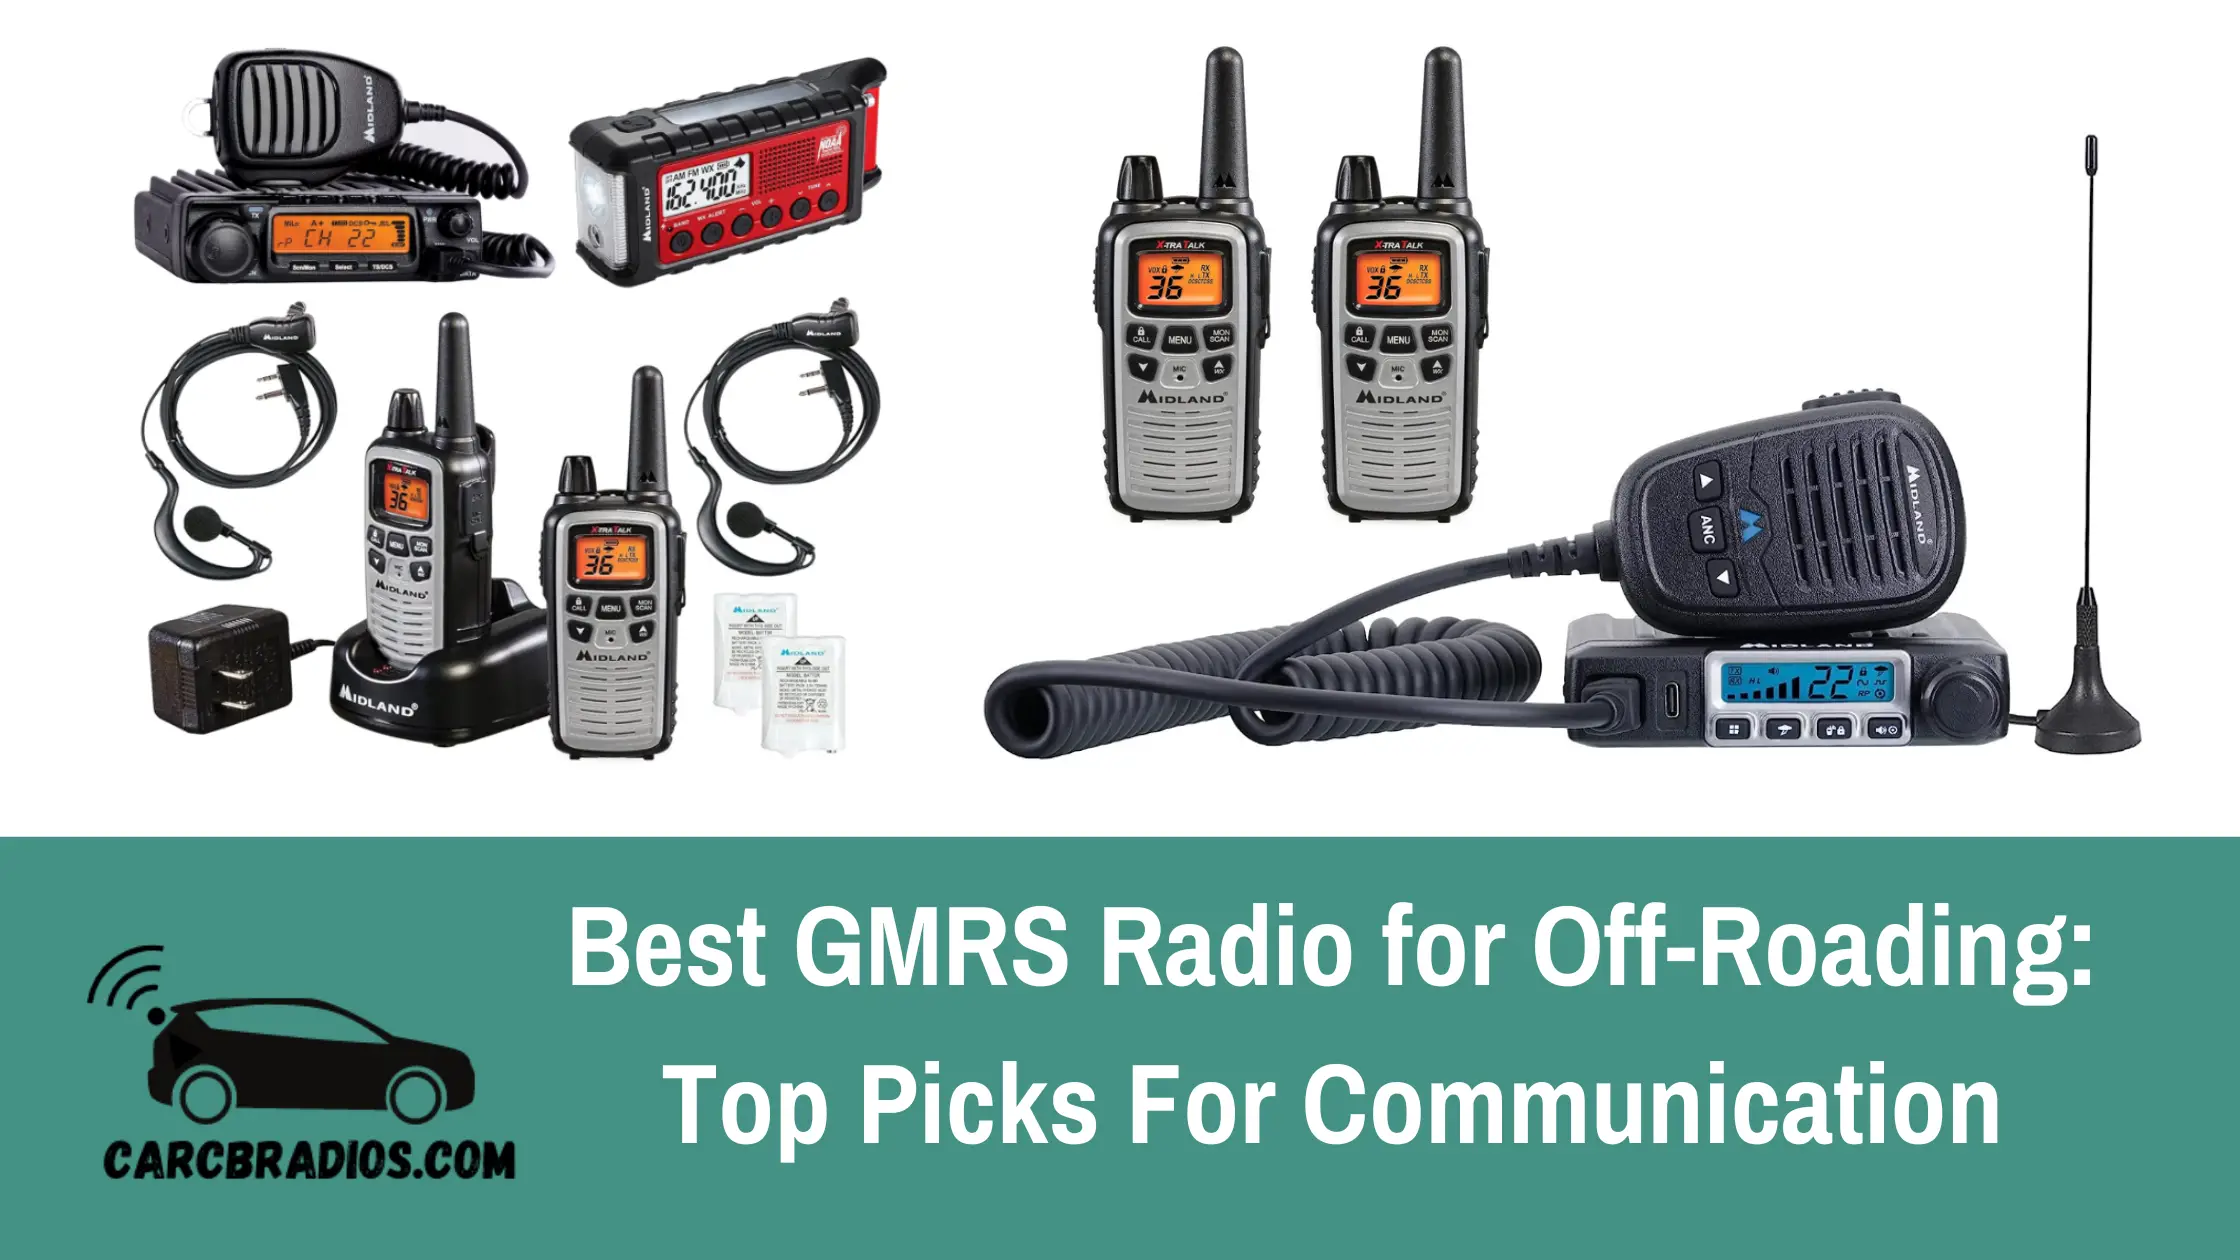 We have compiled a list of the best GMRS radios for off-roading that will keep you connected with your group no matter how far you venture into the wilderness. These radios are designed to withstand tough outdoor conditions and offer a range of features to make your off-roading experience safer and more enjoyable. So, whether you're exploring the mountains or cruising through the desert, we've got you covered with our top picks for the best GMRS radios for off-roading.